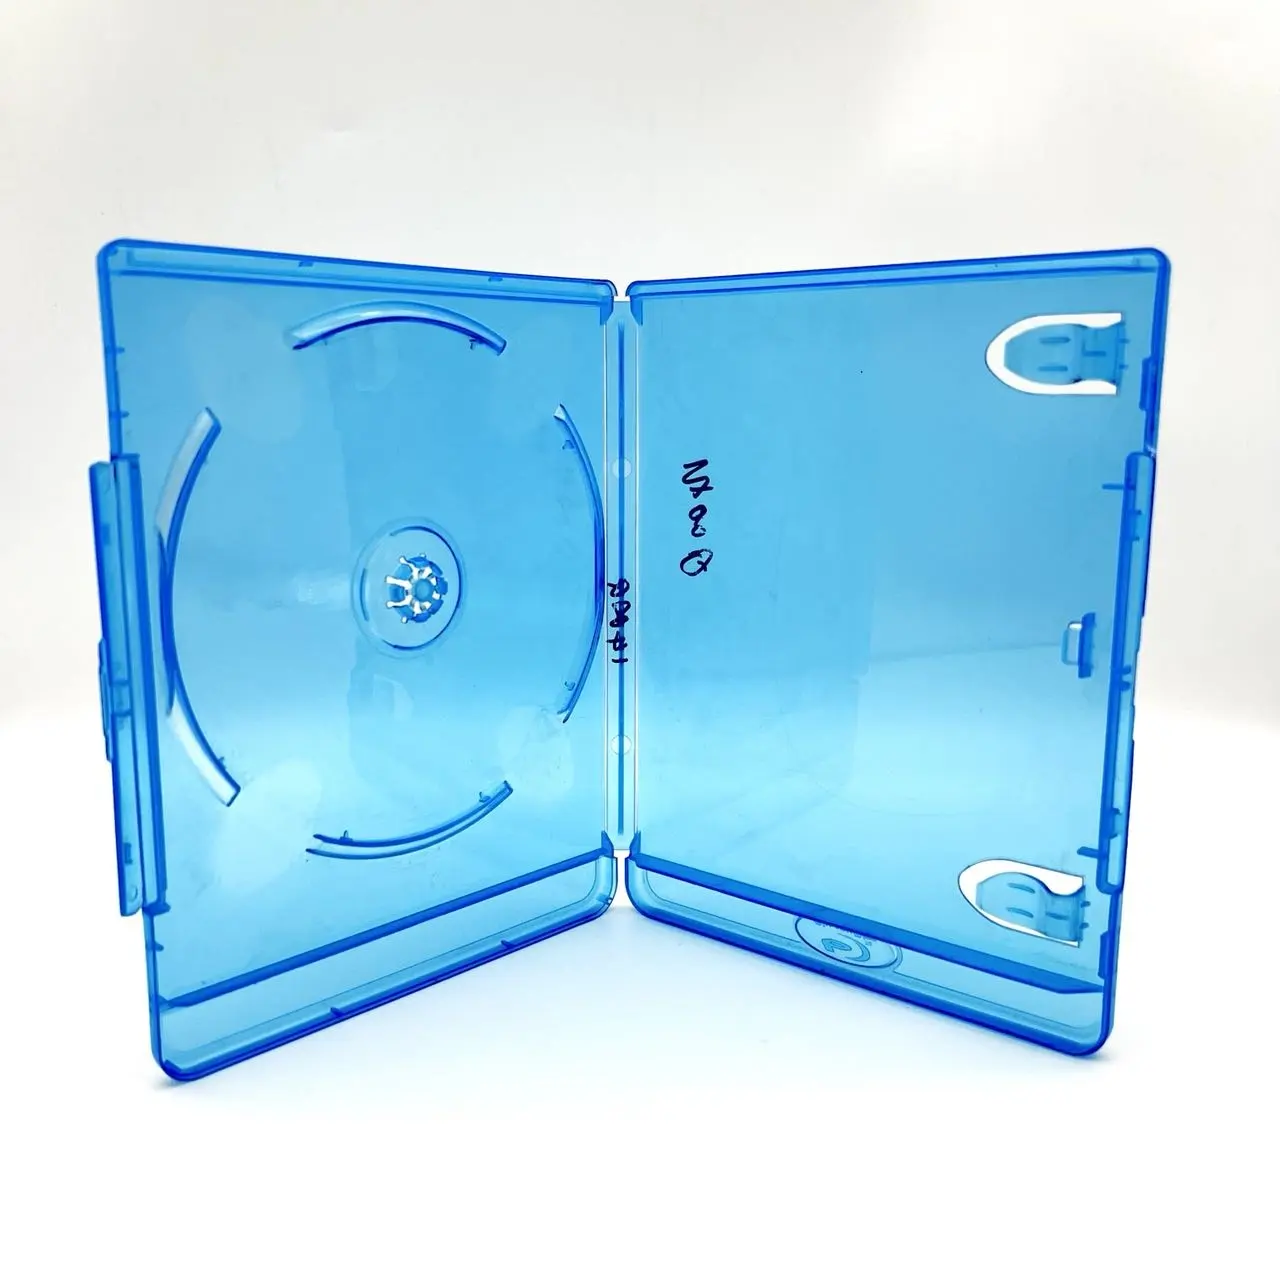 Blu_ray Plastic case for storing CD.DVD discs _PS3 PS5 disc case PS4 game case